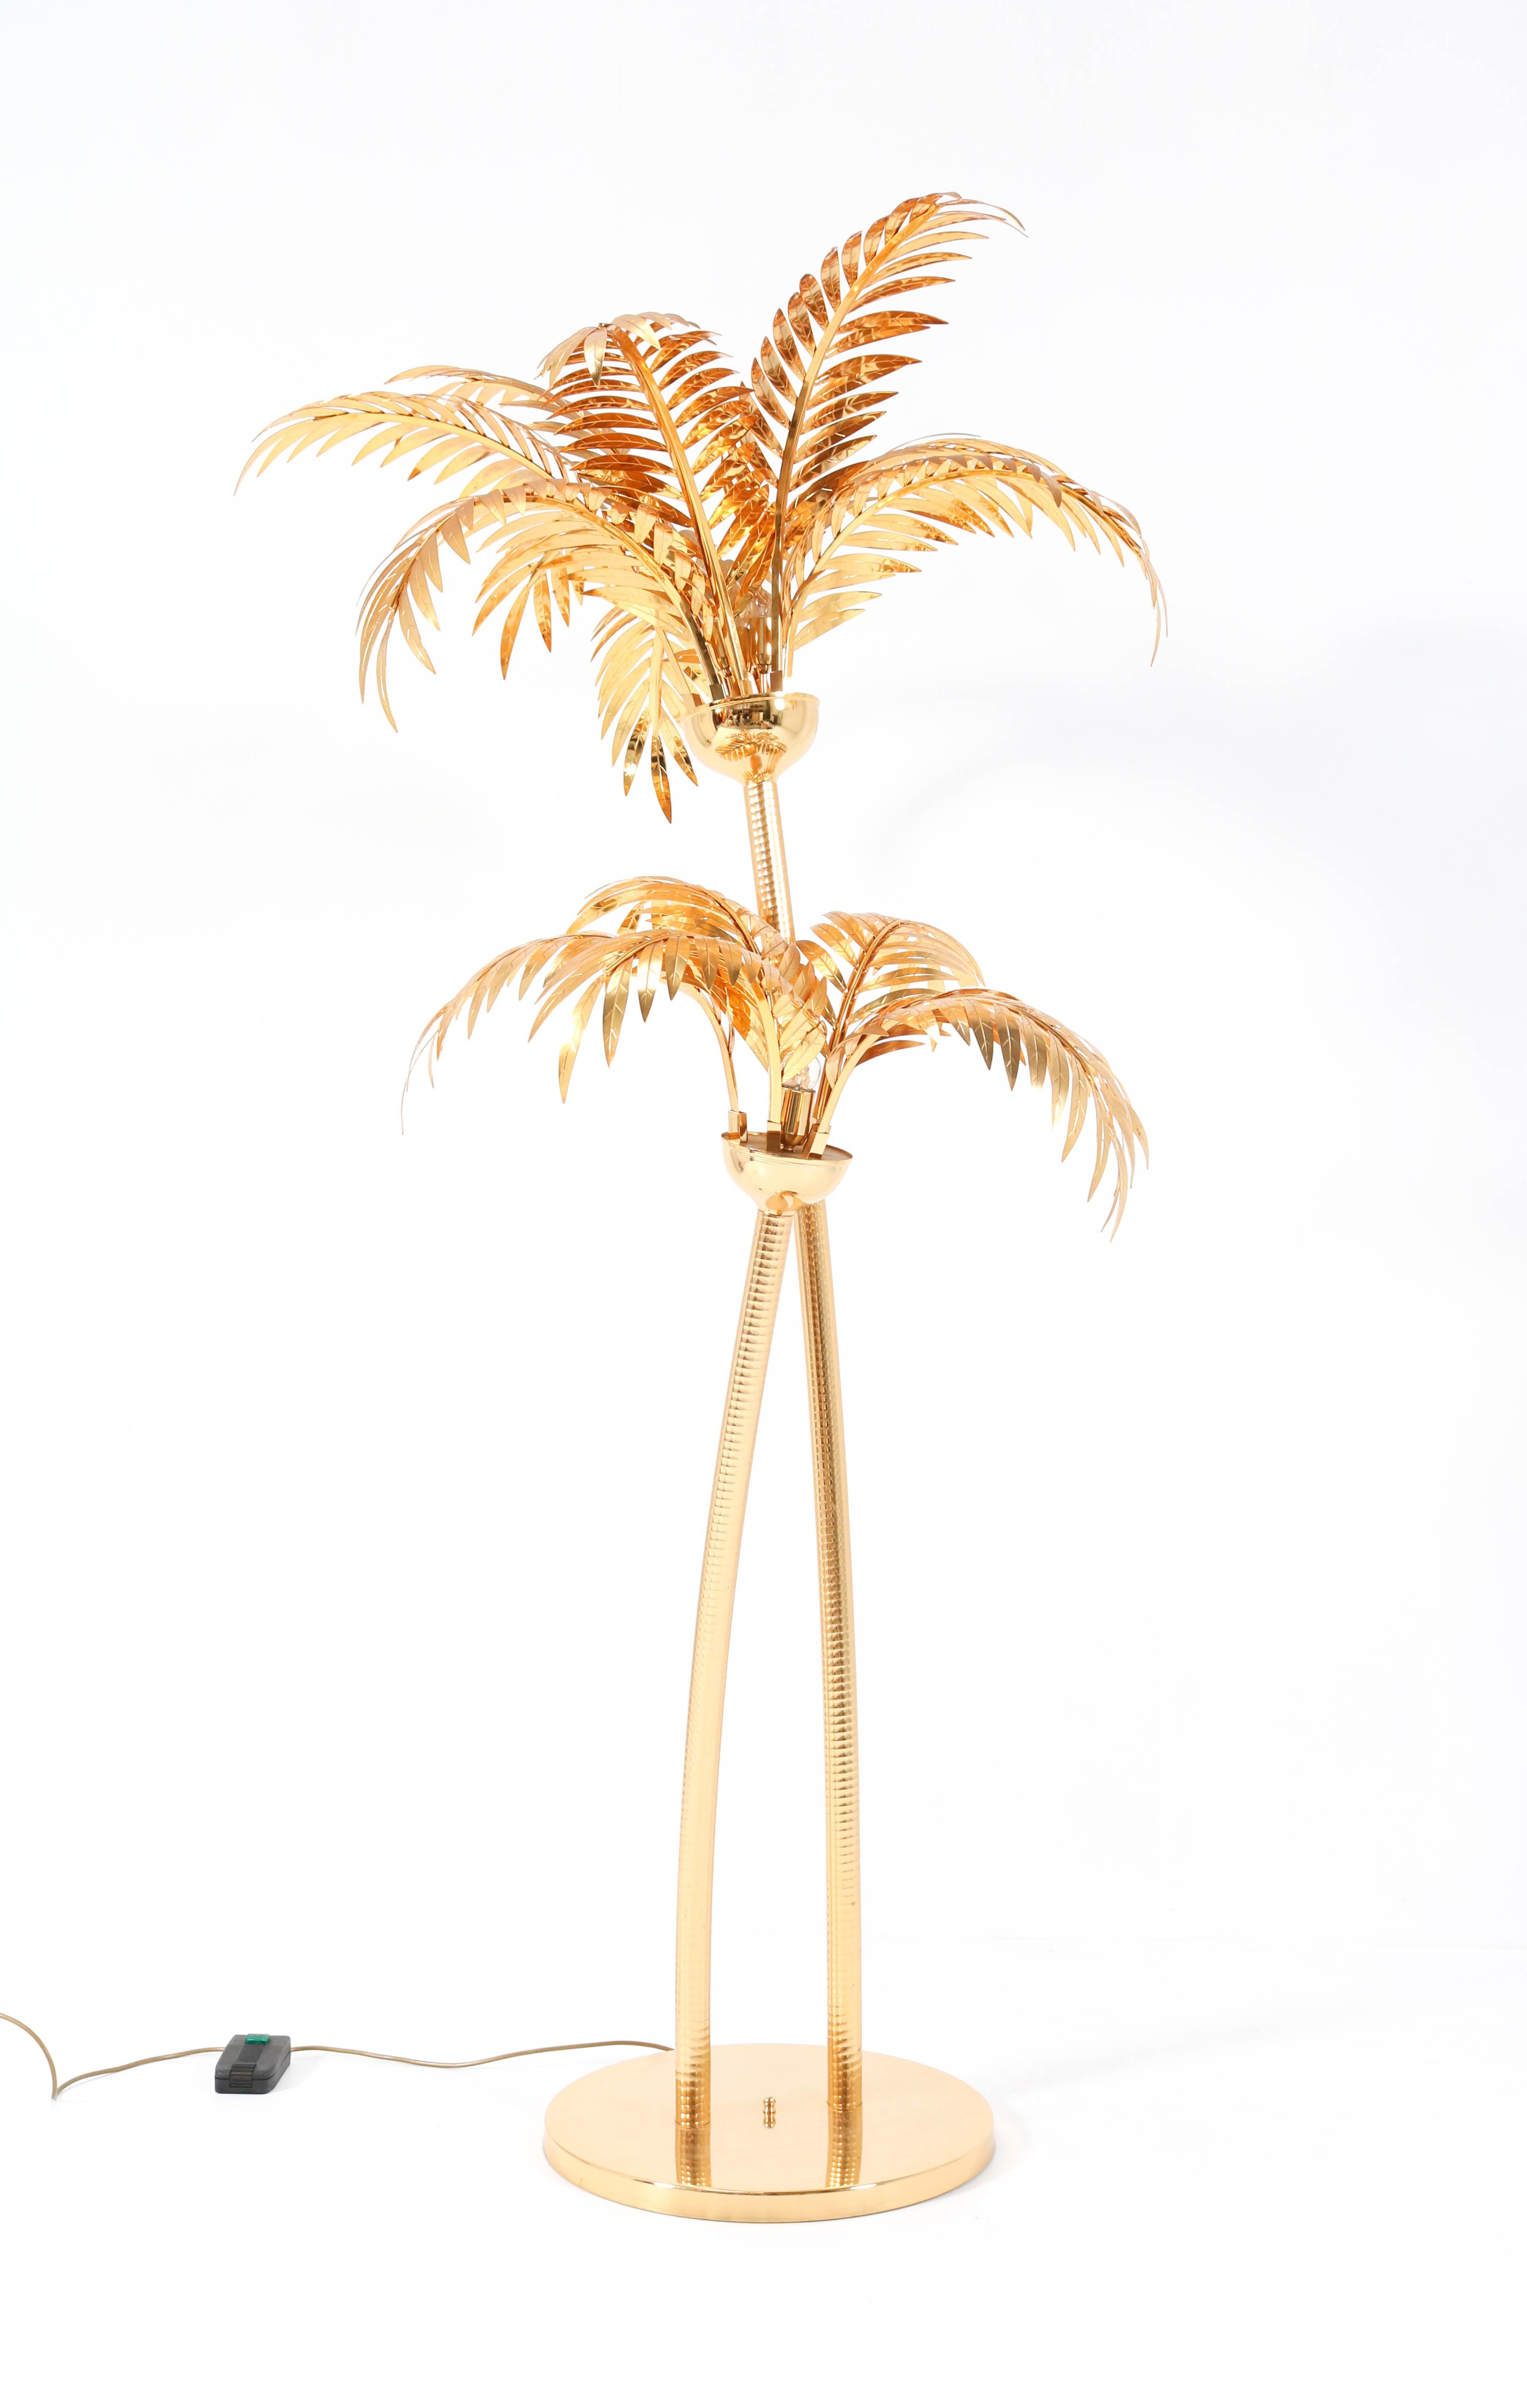 Stunning Hollywood Regency palm tree floor lamp.
In the style of Maison Baguès.
Striking French design from the 1990s.
This decorative item with an height of 209 cm or 82.28 in. is absolute an eye catcher in a Hollywood regency Mid-Century Modern